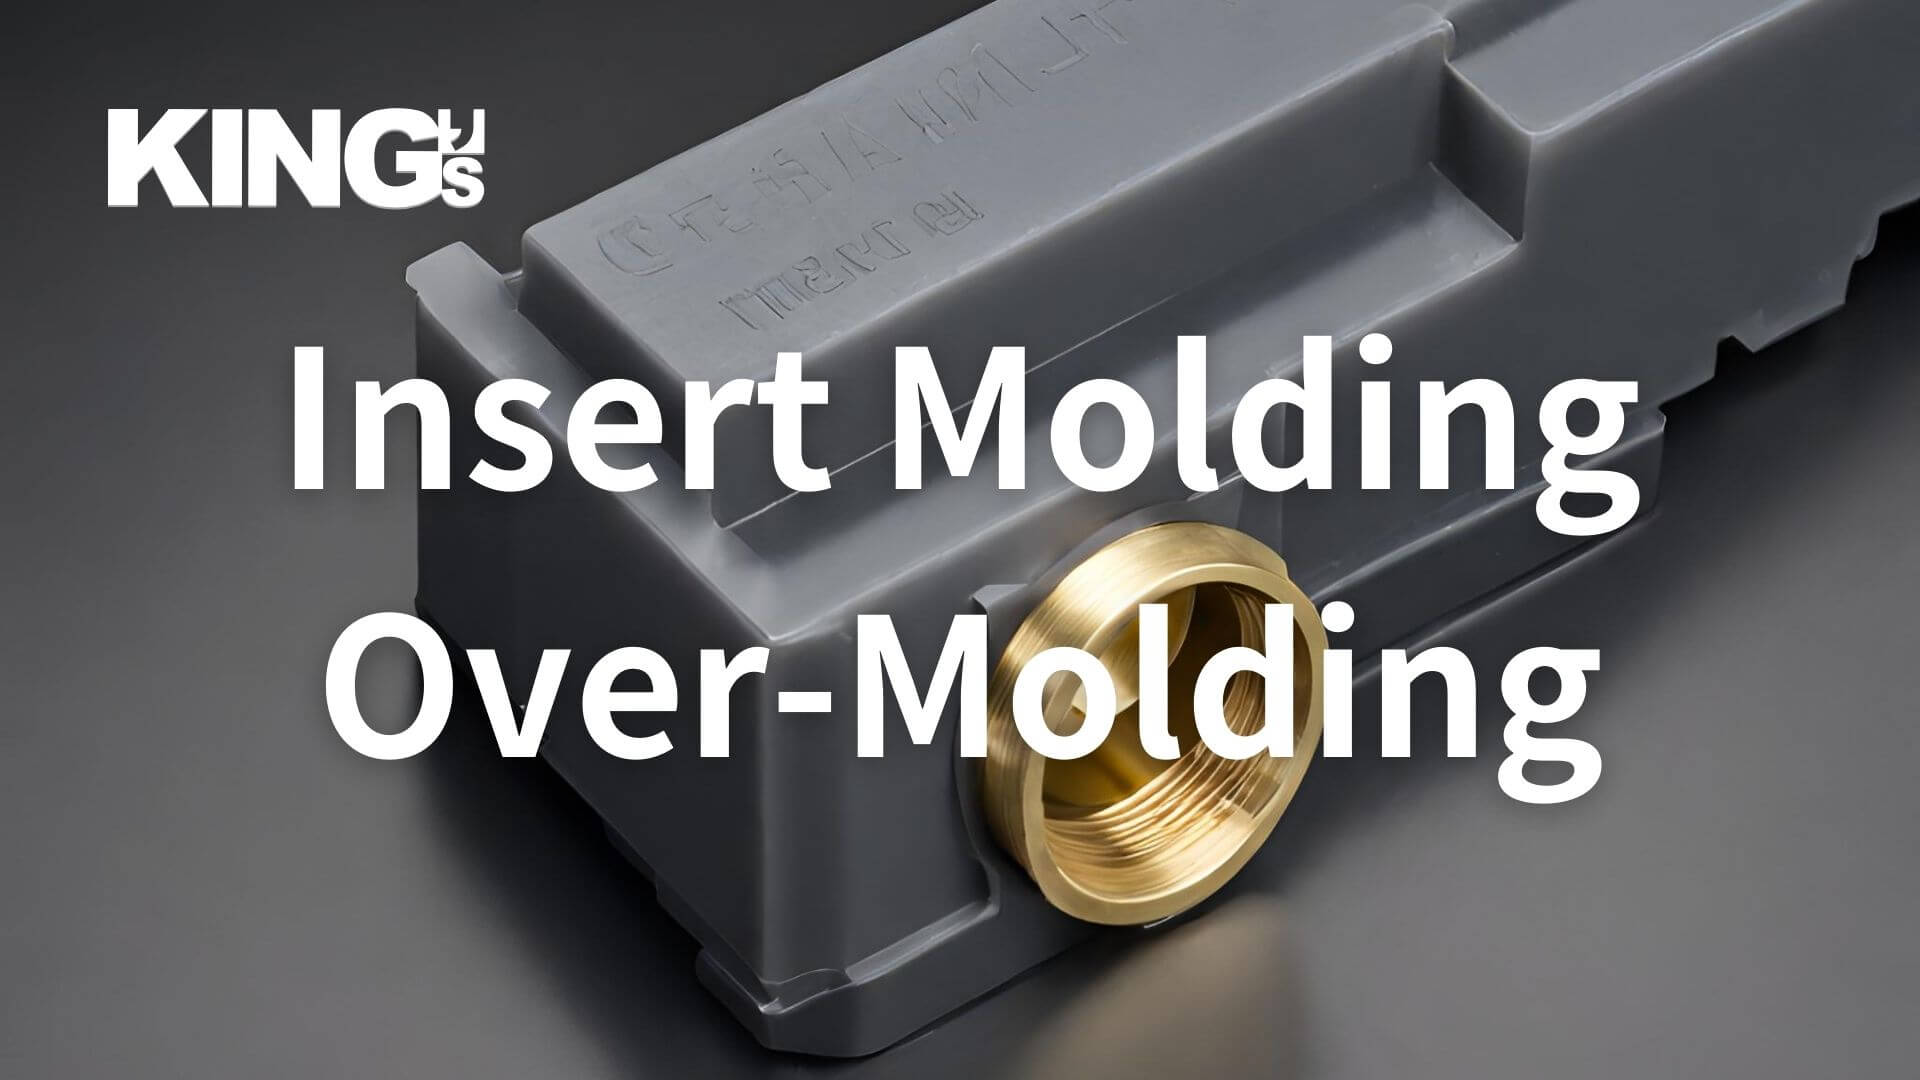 Comparative Analysis of Insert Molding and Over-Molding